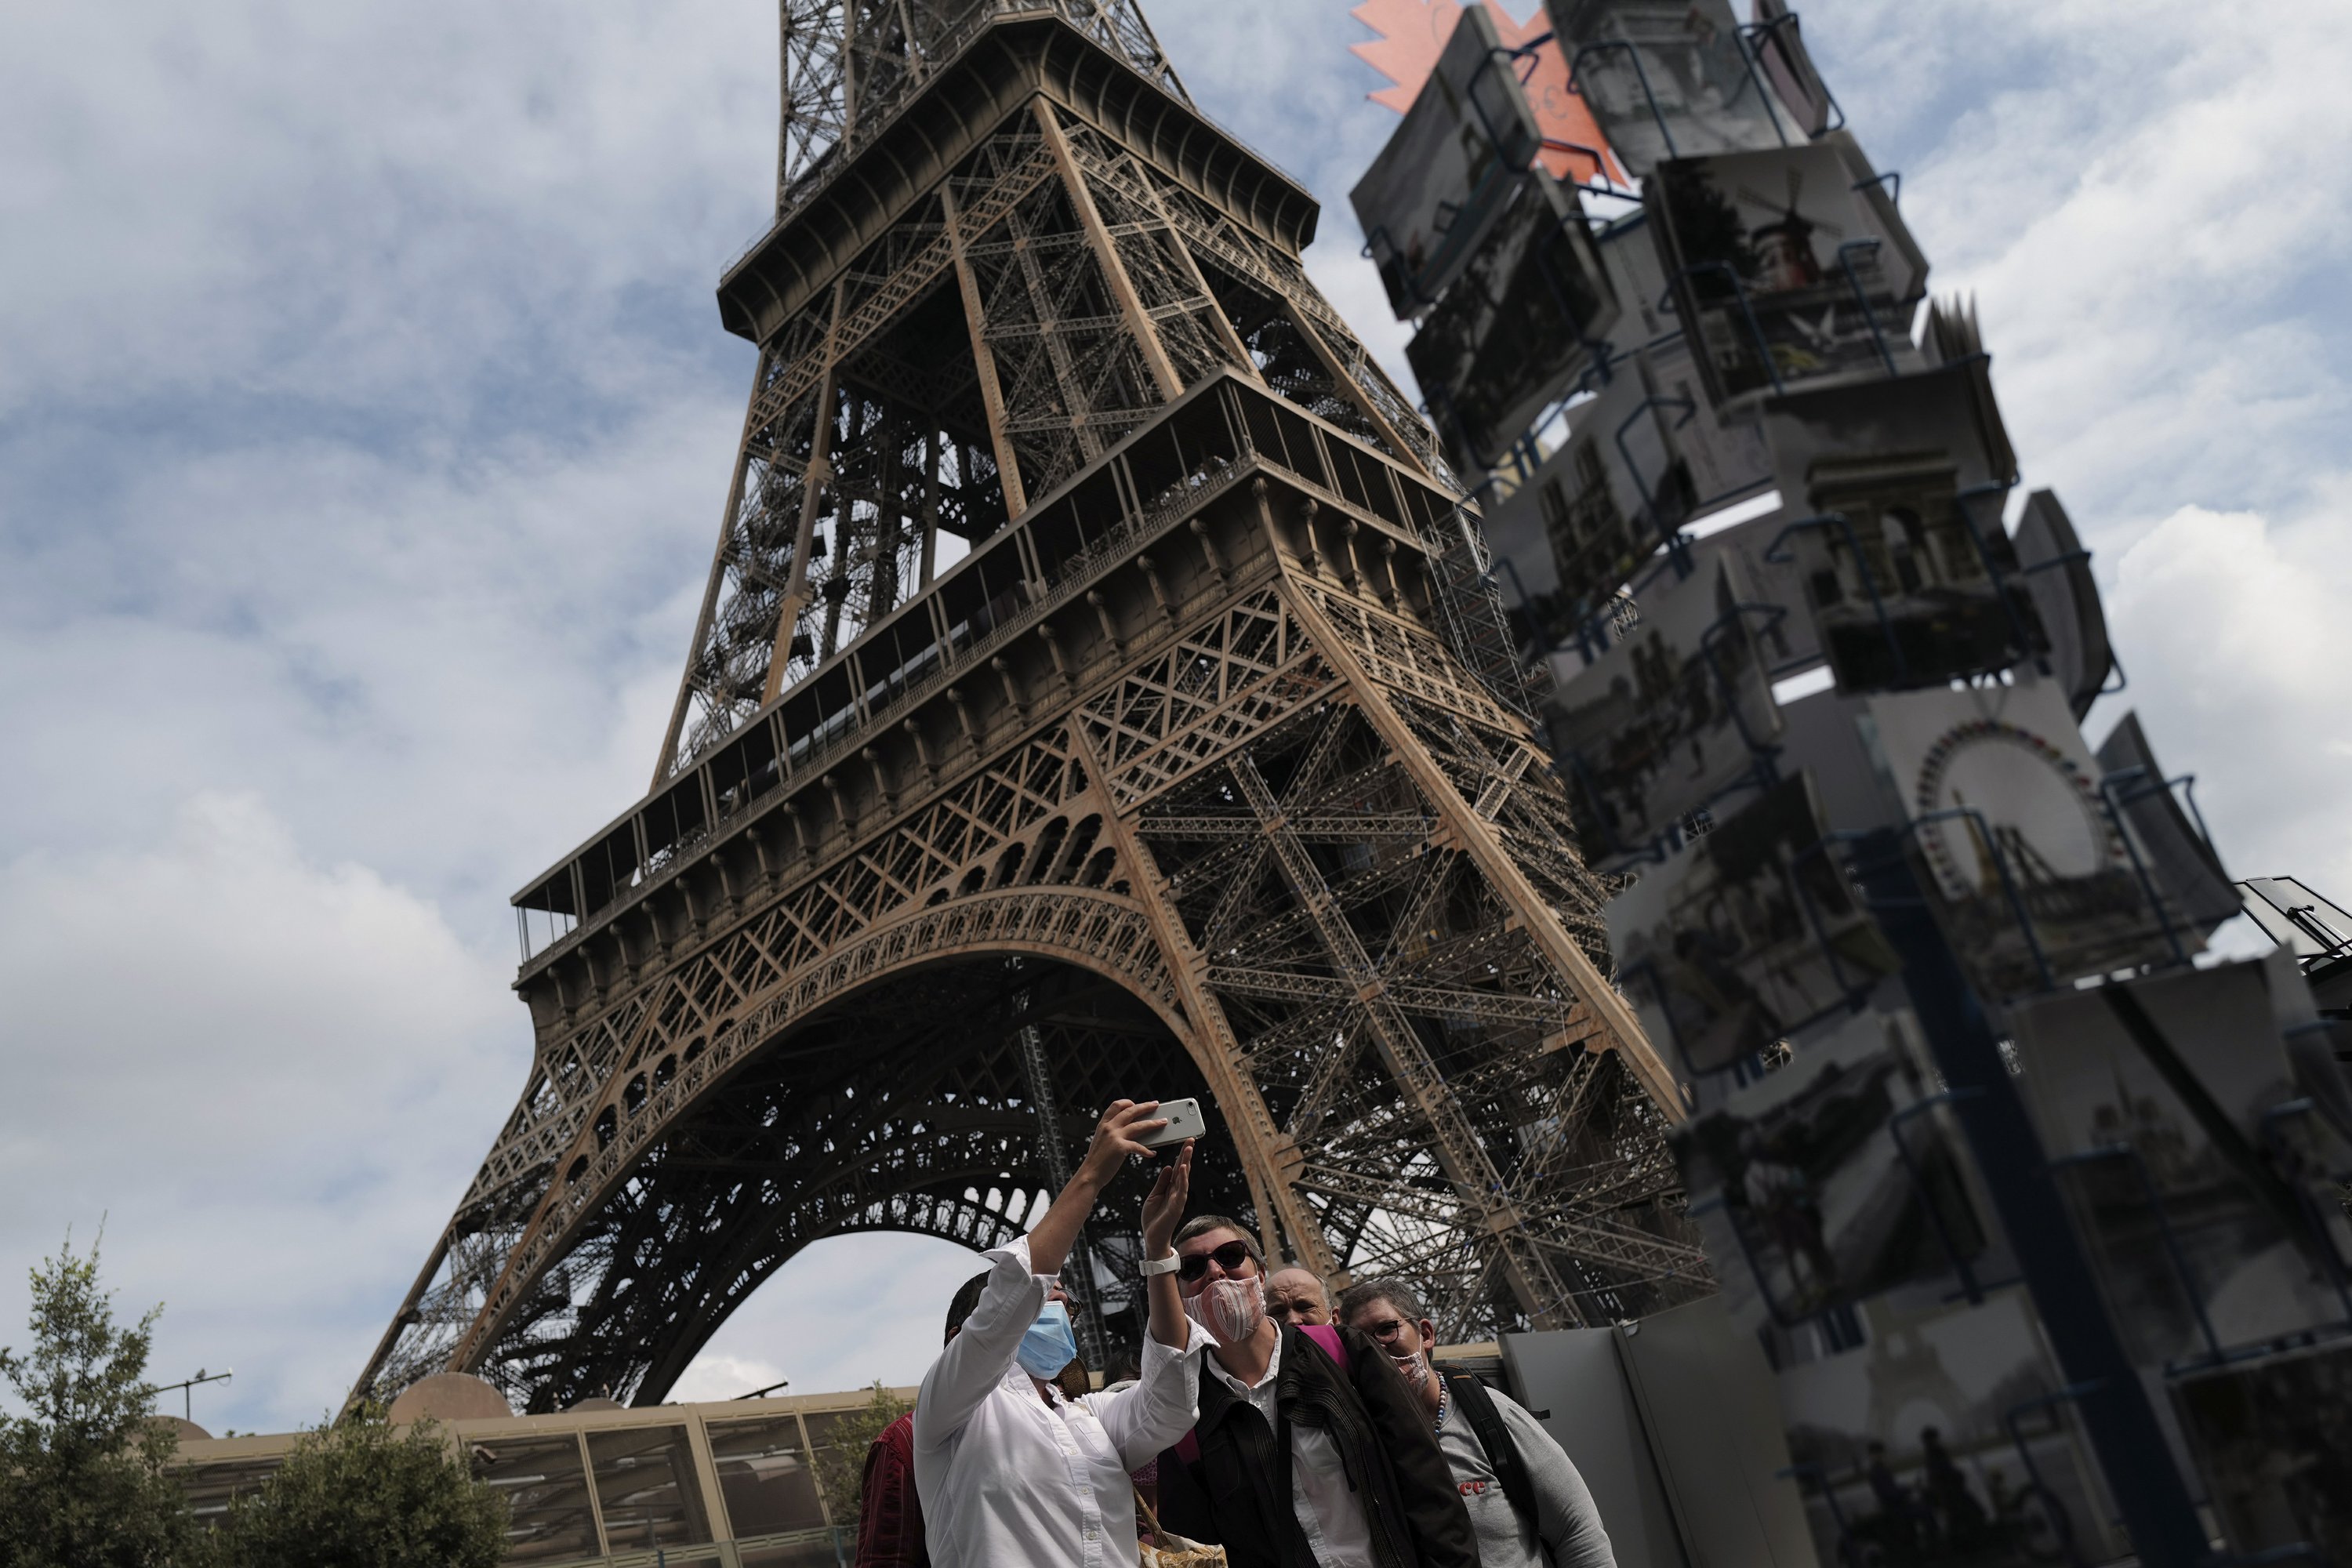 The Eiffel Tower Reached New Heights